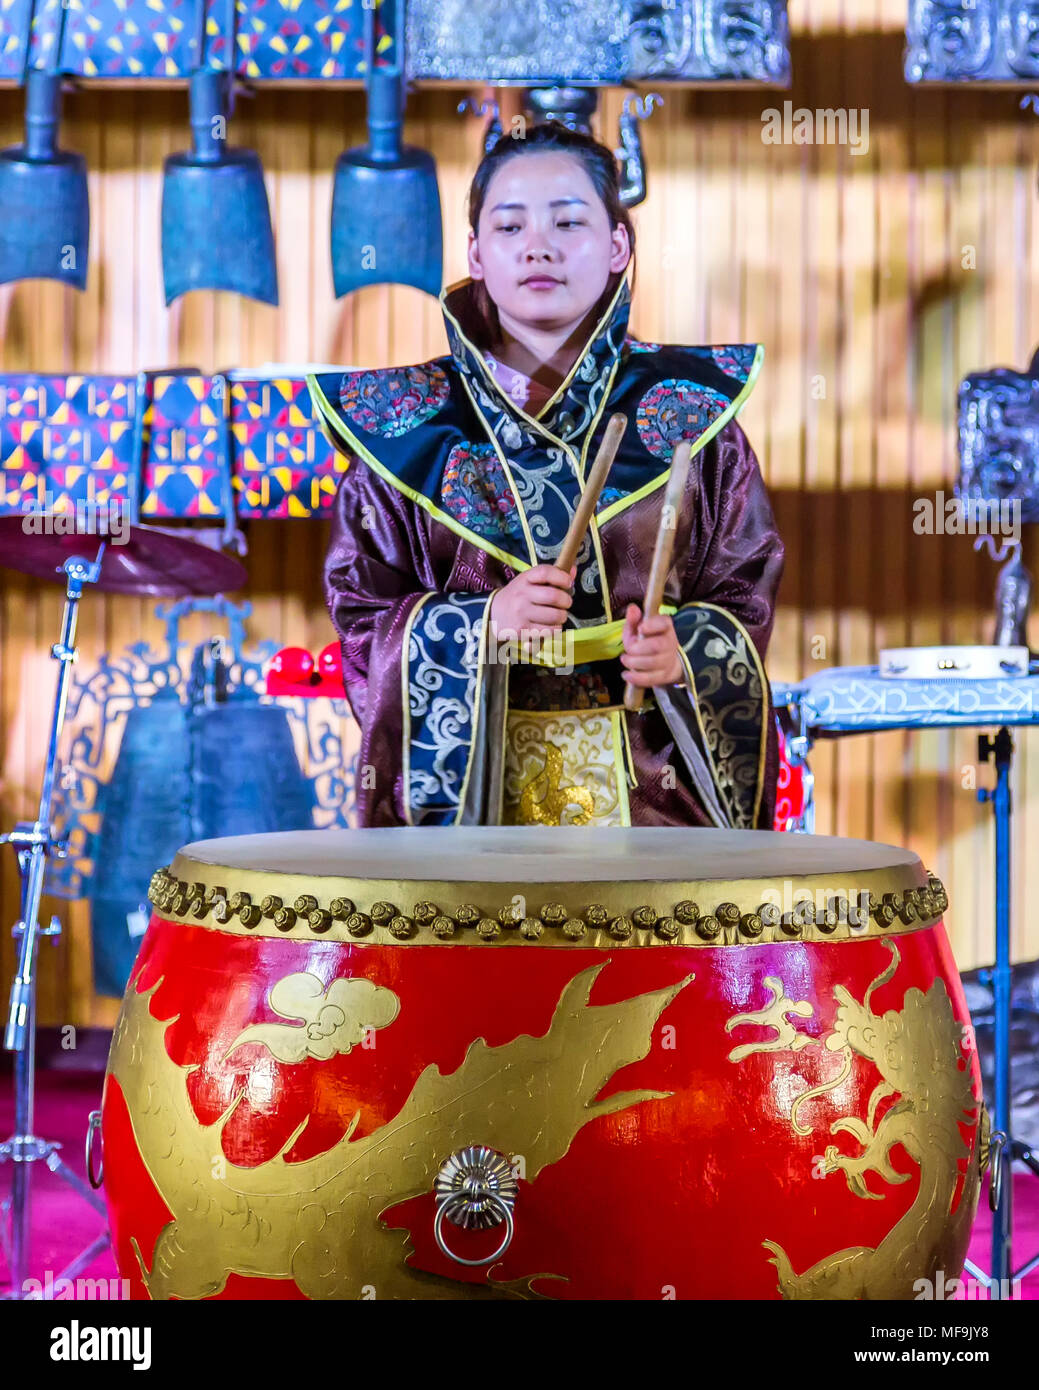 A Chinese girl in a purple kimono plays a large red drum during a  performance at the Drum Tower, Xian, China Stock Photo - Alamy